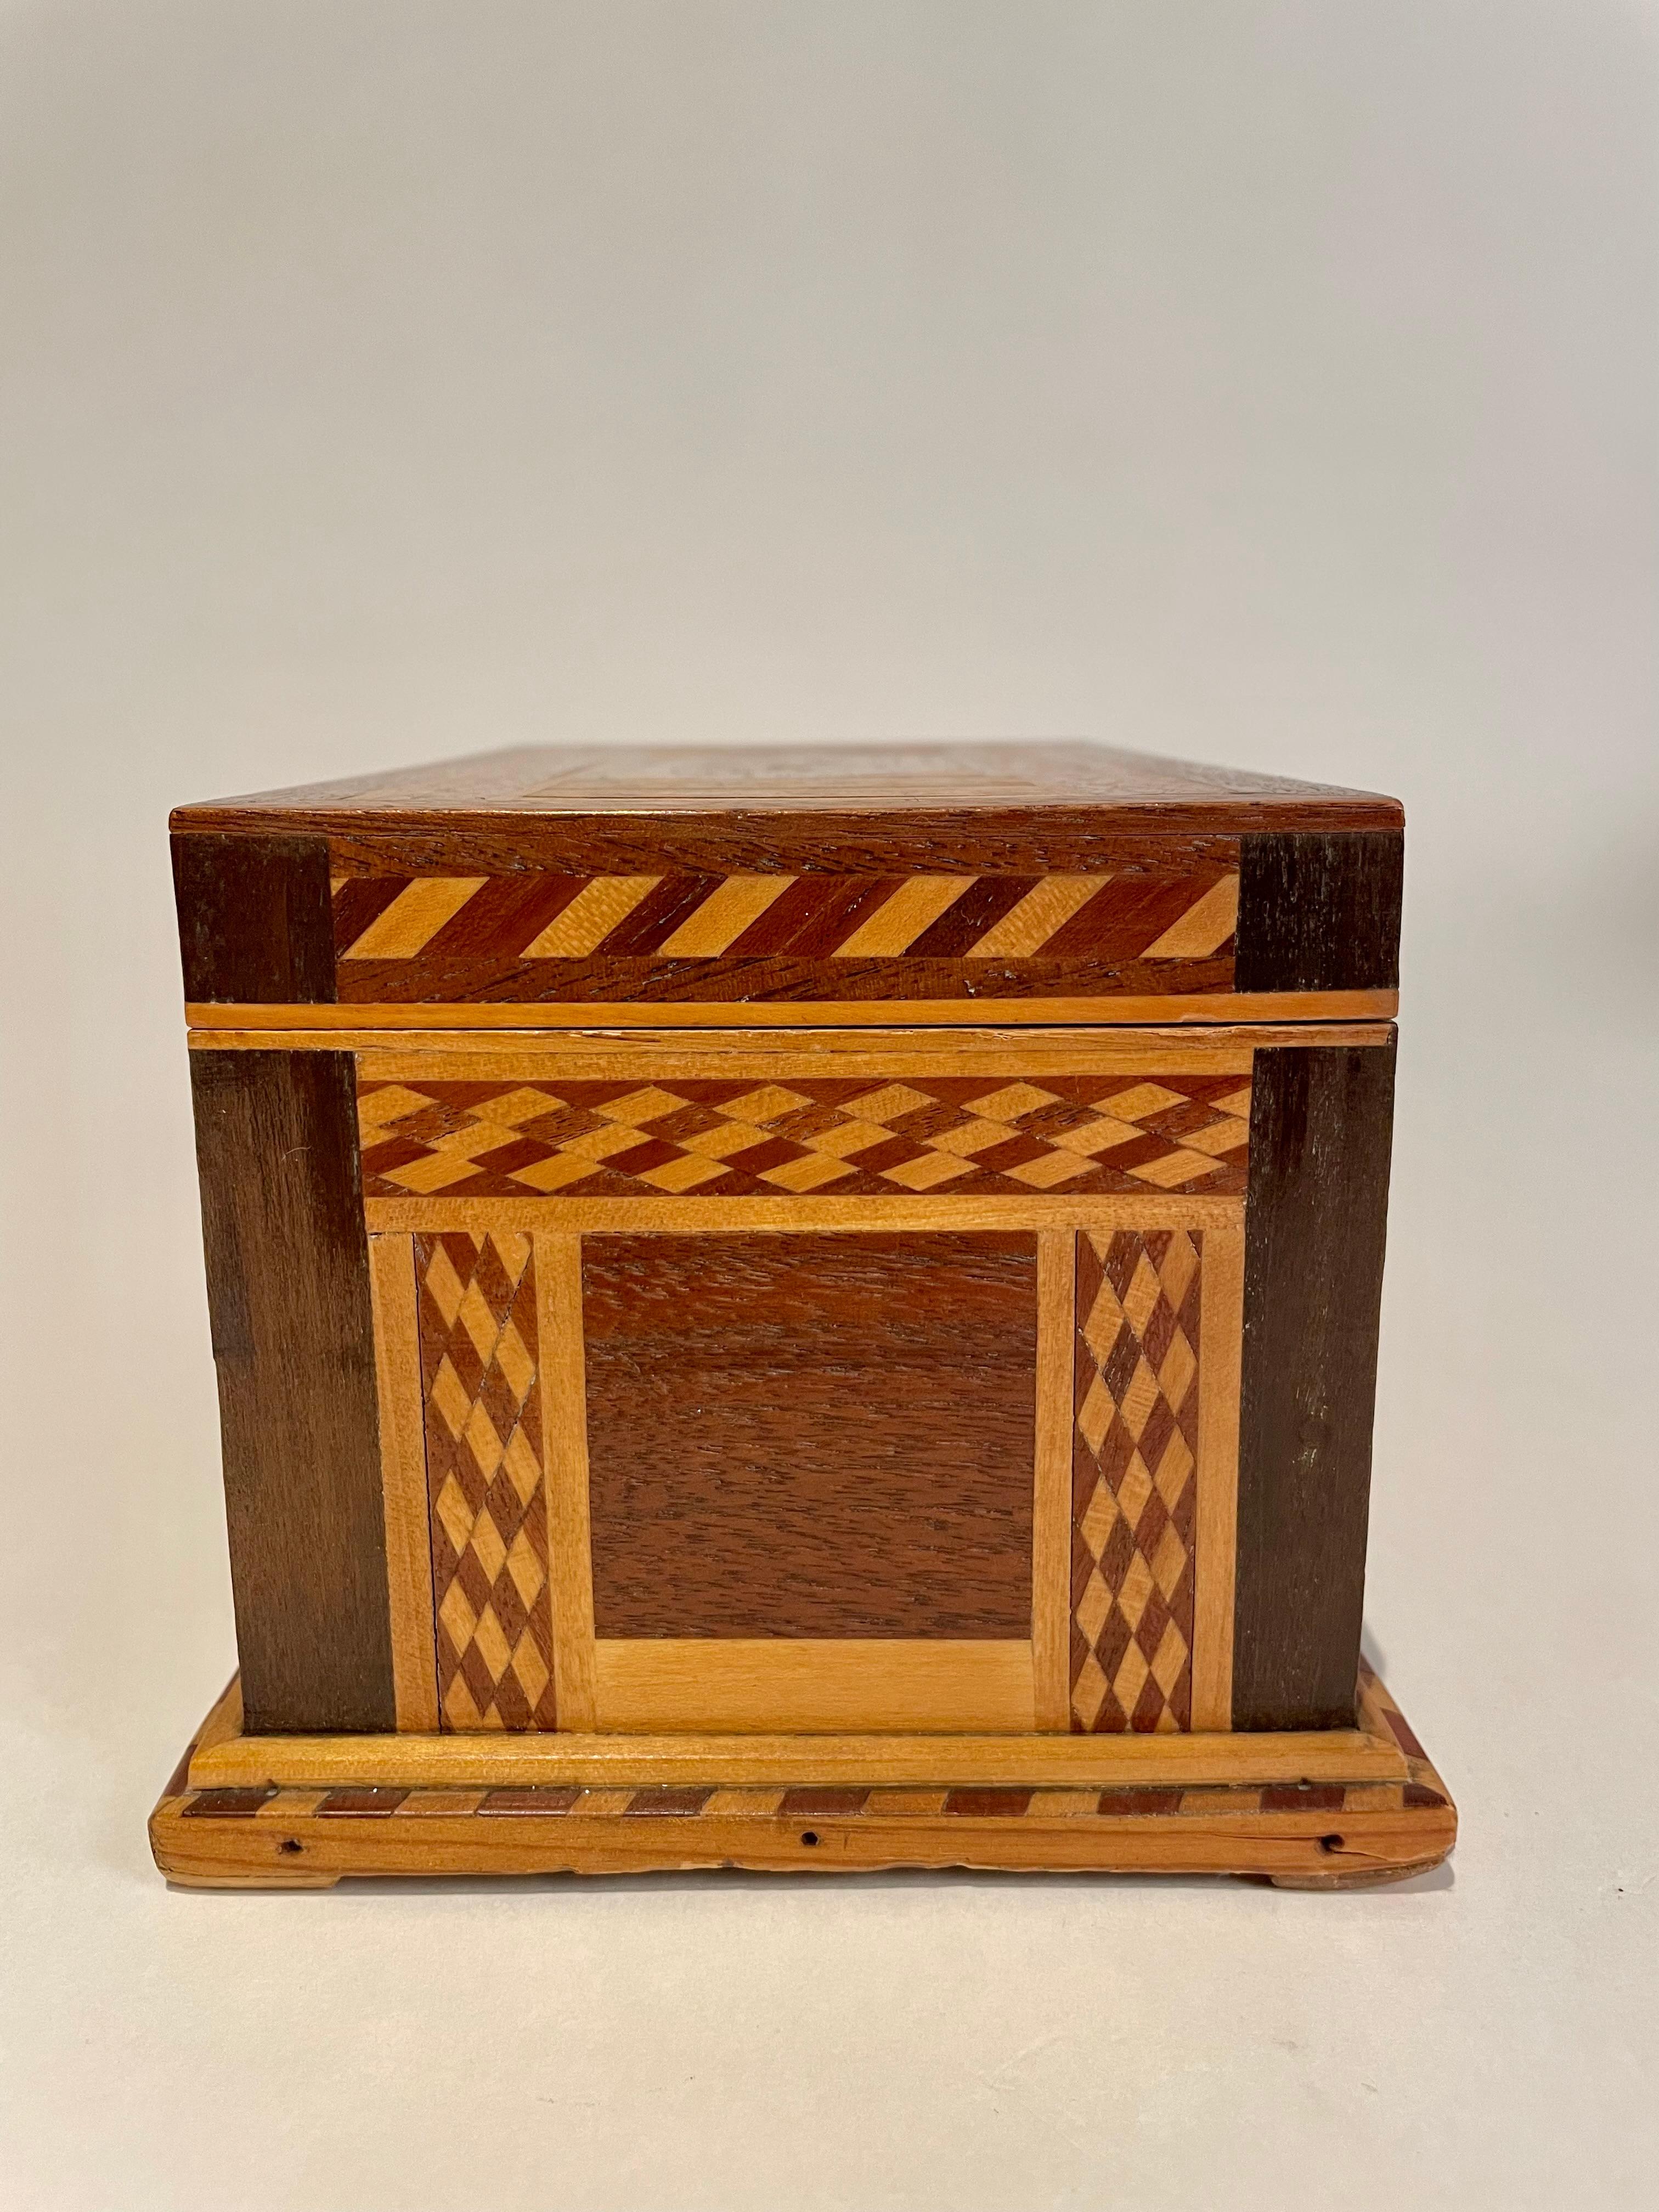 19th C American Walnut Box With Geometric And Starburst Fruitwood Inlay 4